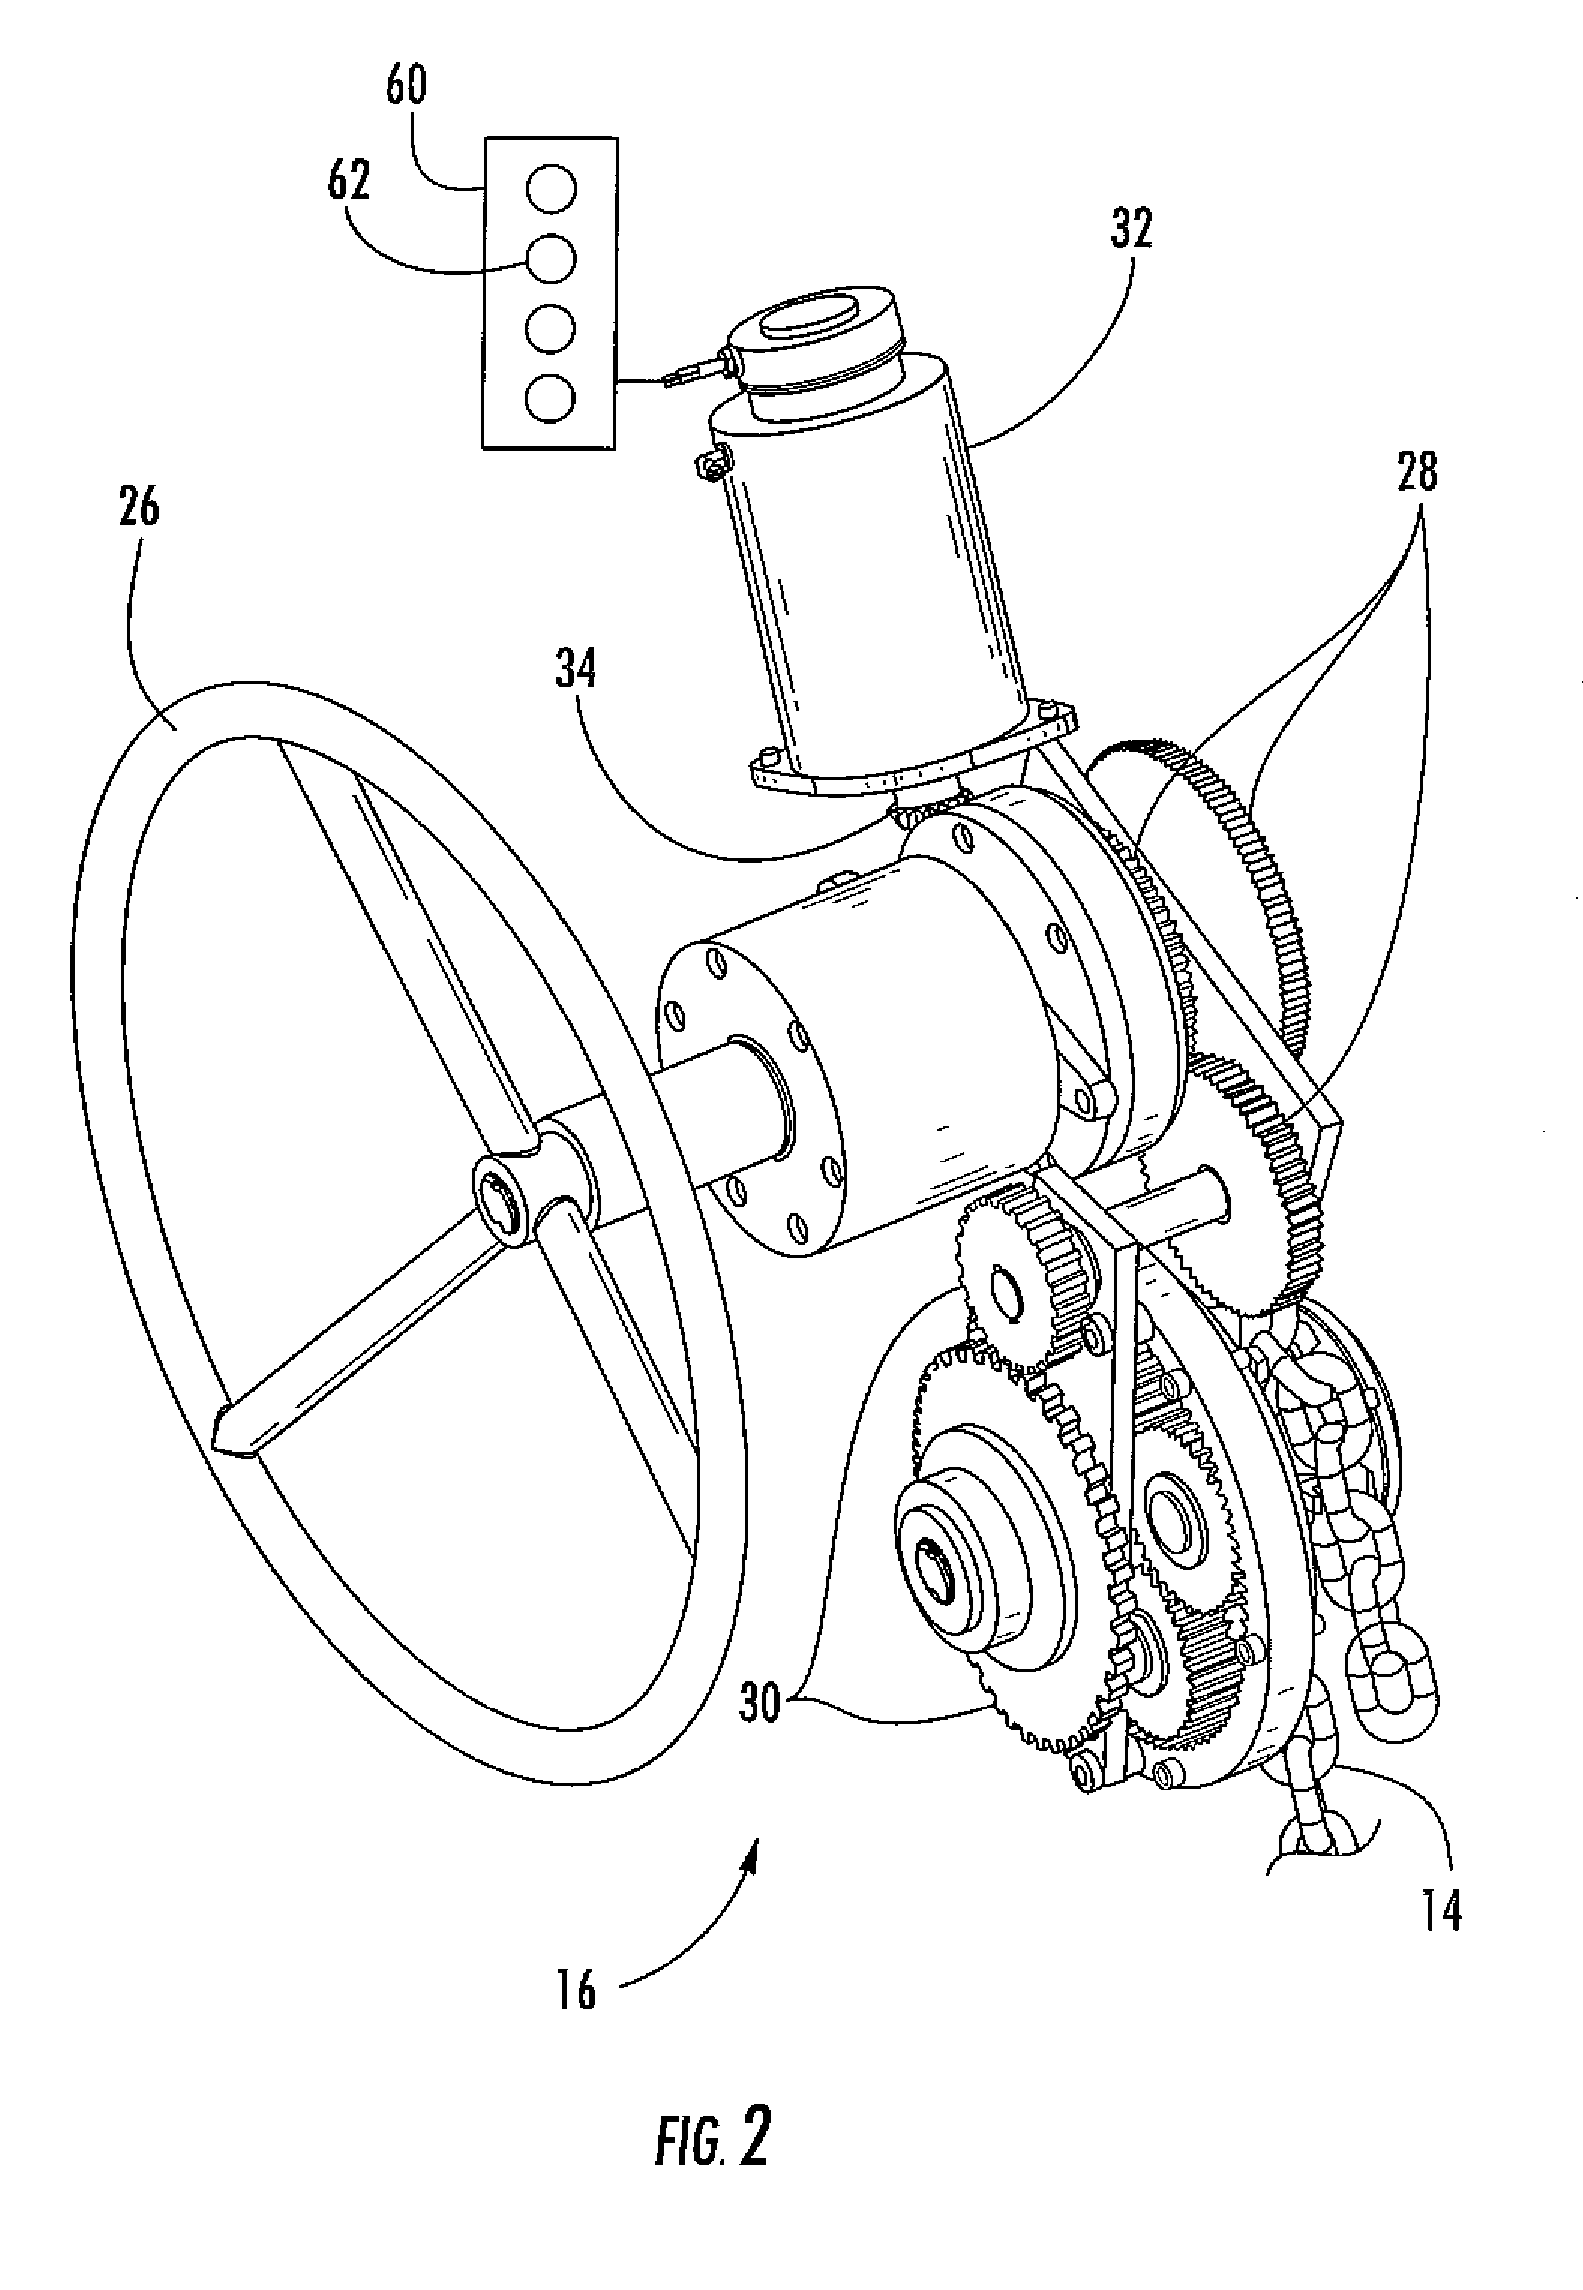 System and method for operating a locomotive parking brake